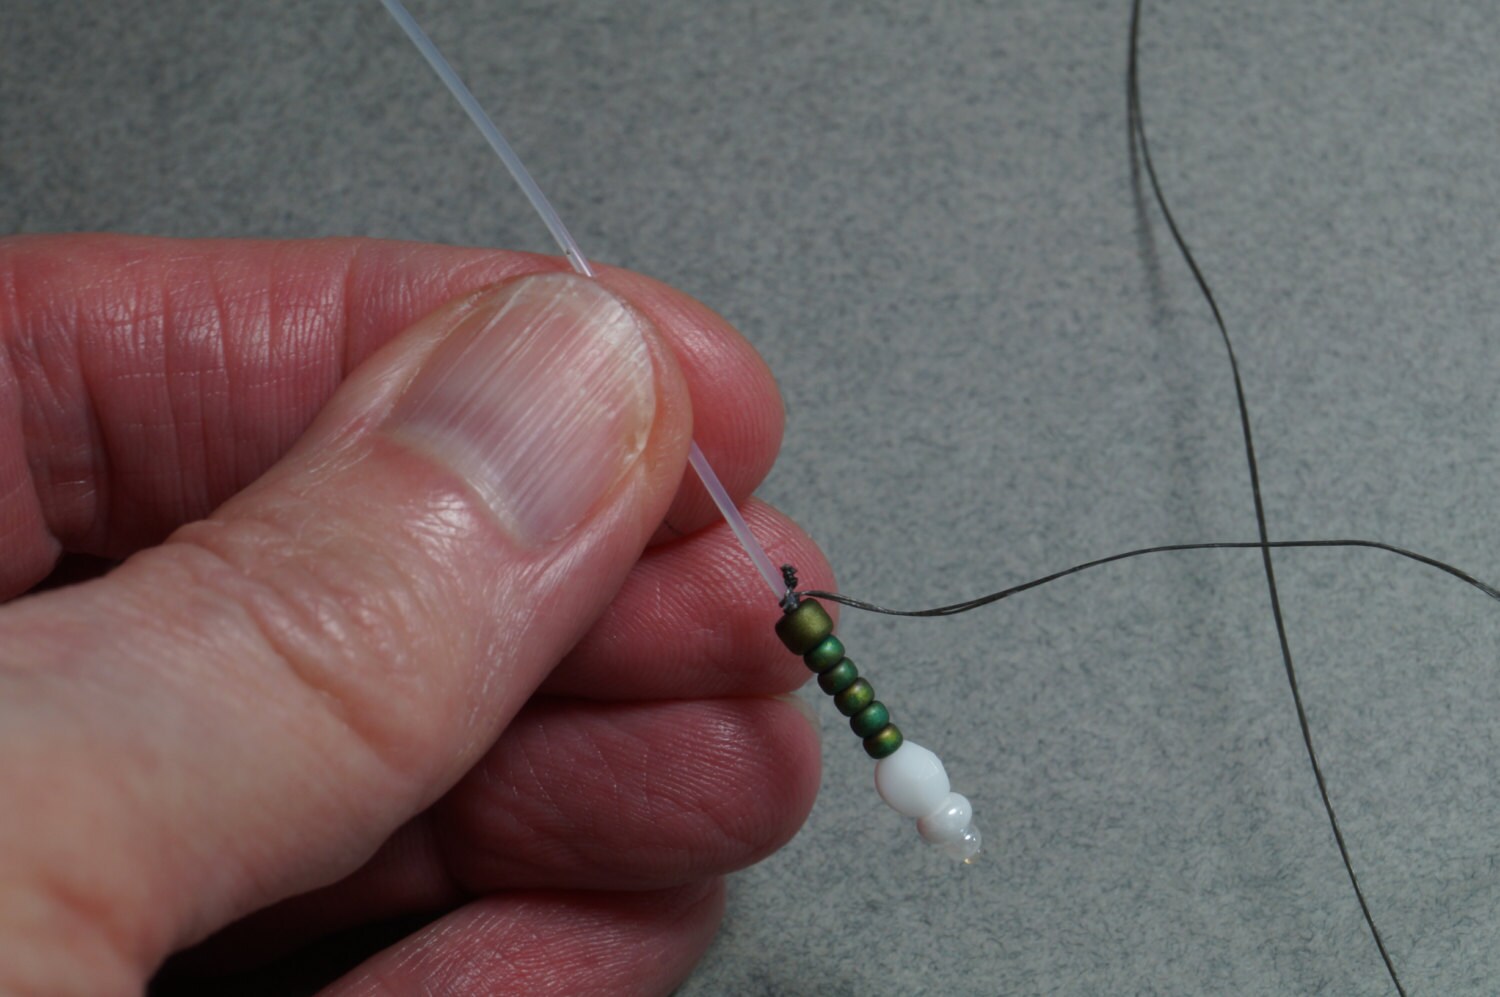 Stren 50 Test Fishing Line 2 Yds Enough for 12 White Lilac or 6 Rose Hips  Necklaces. 